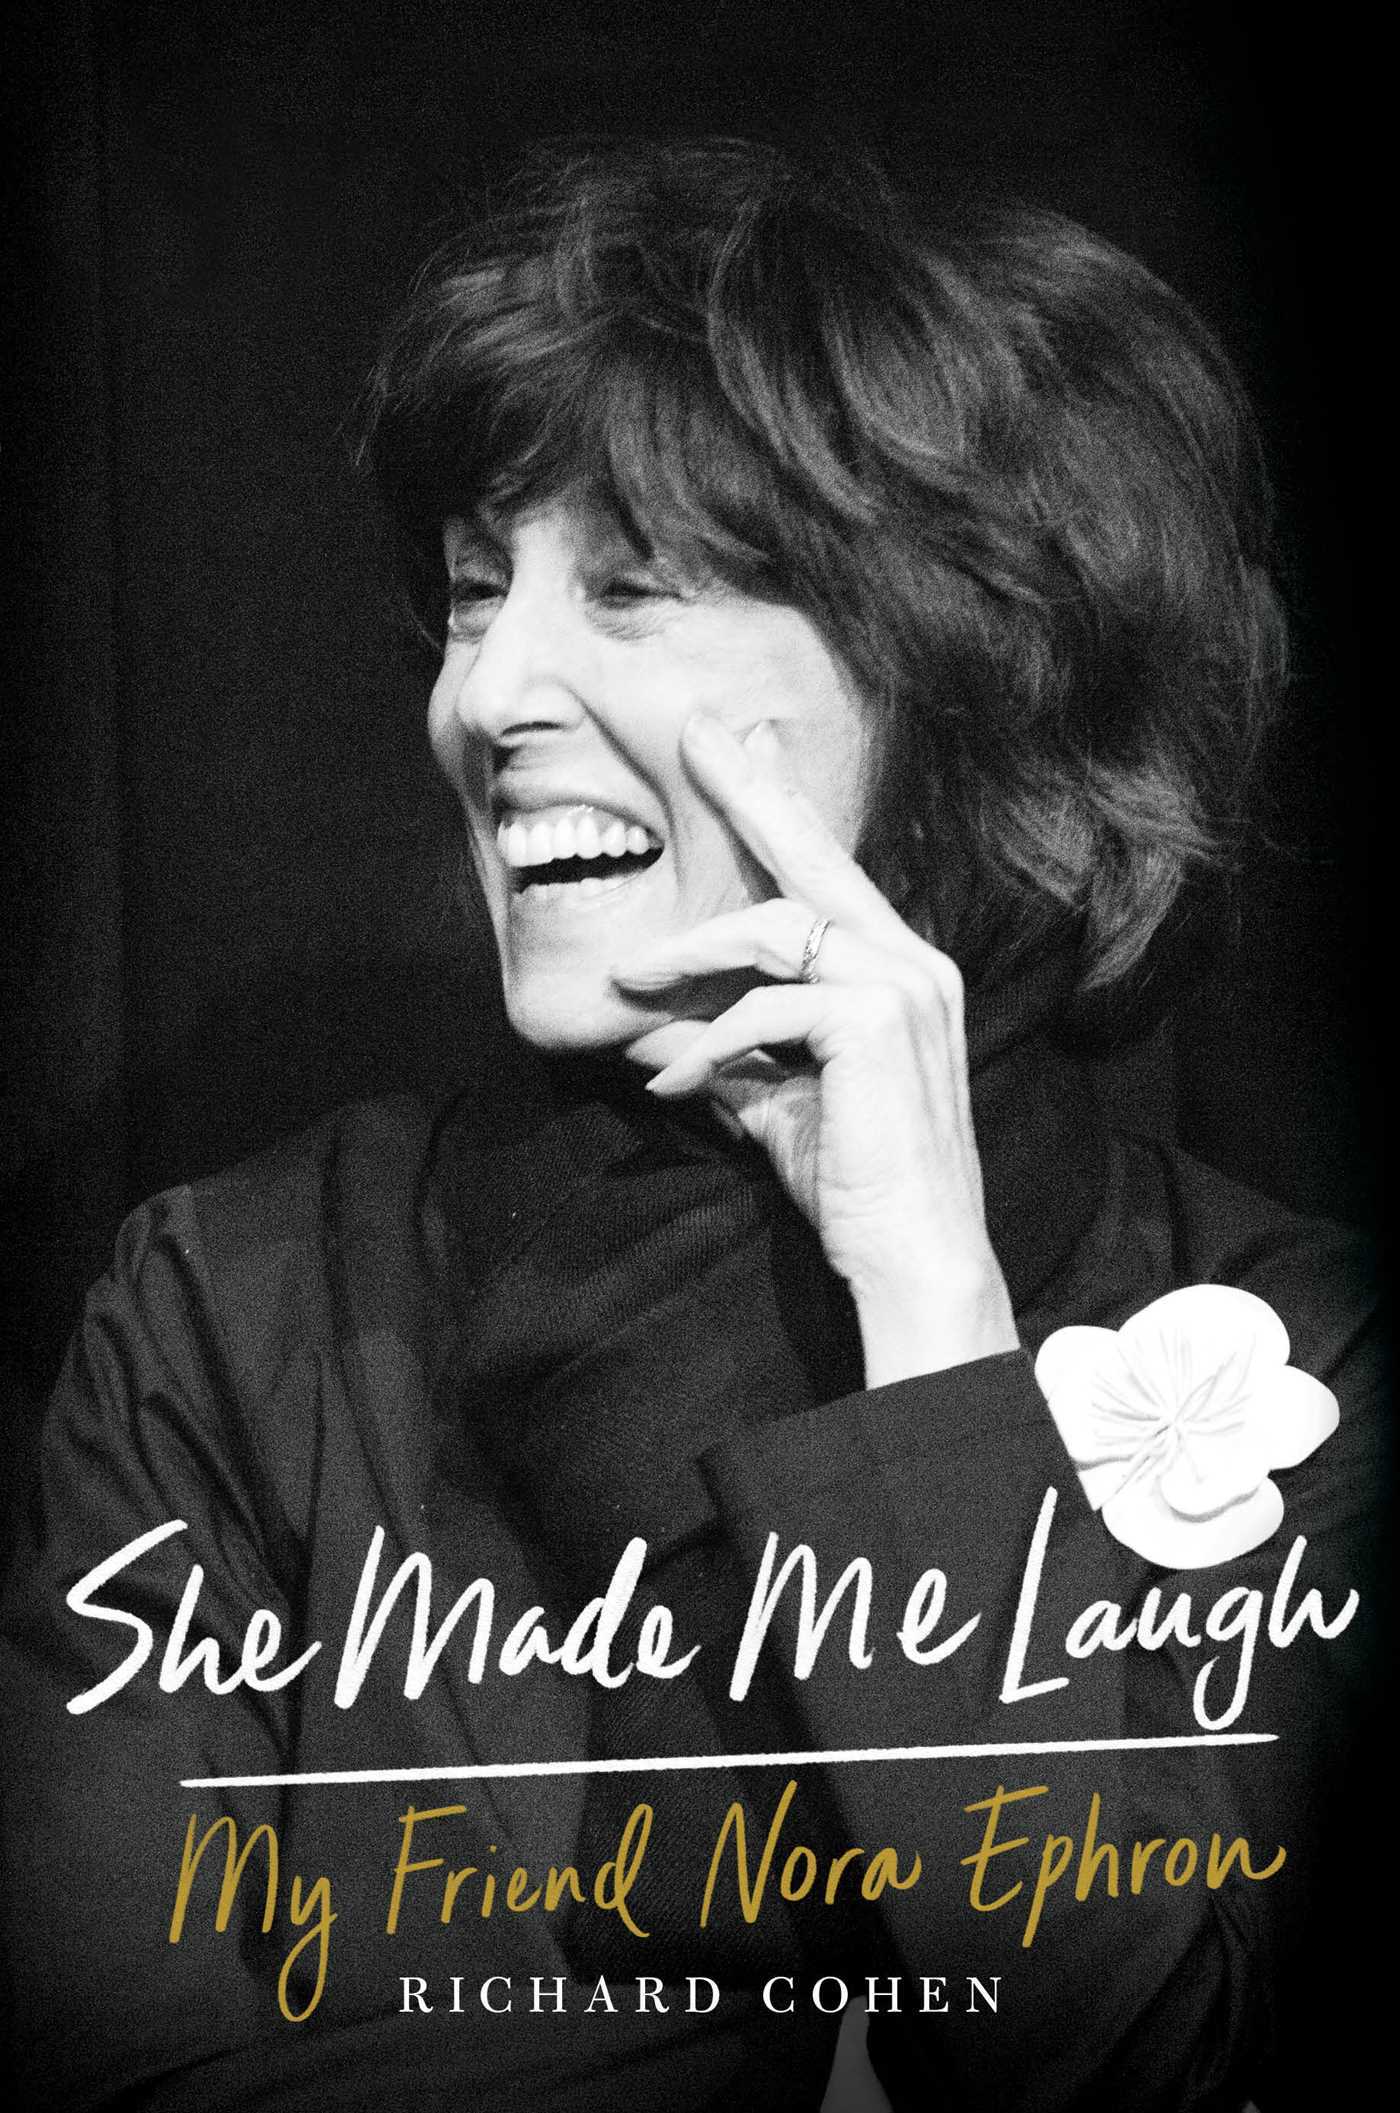 Image for "She Made Me Laugh"